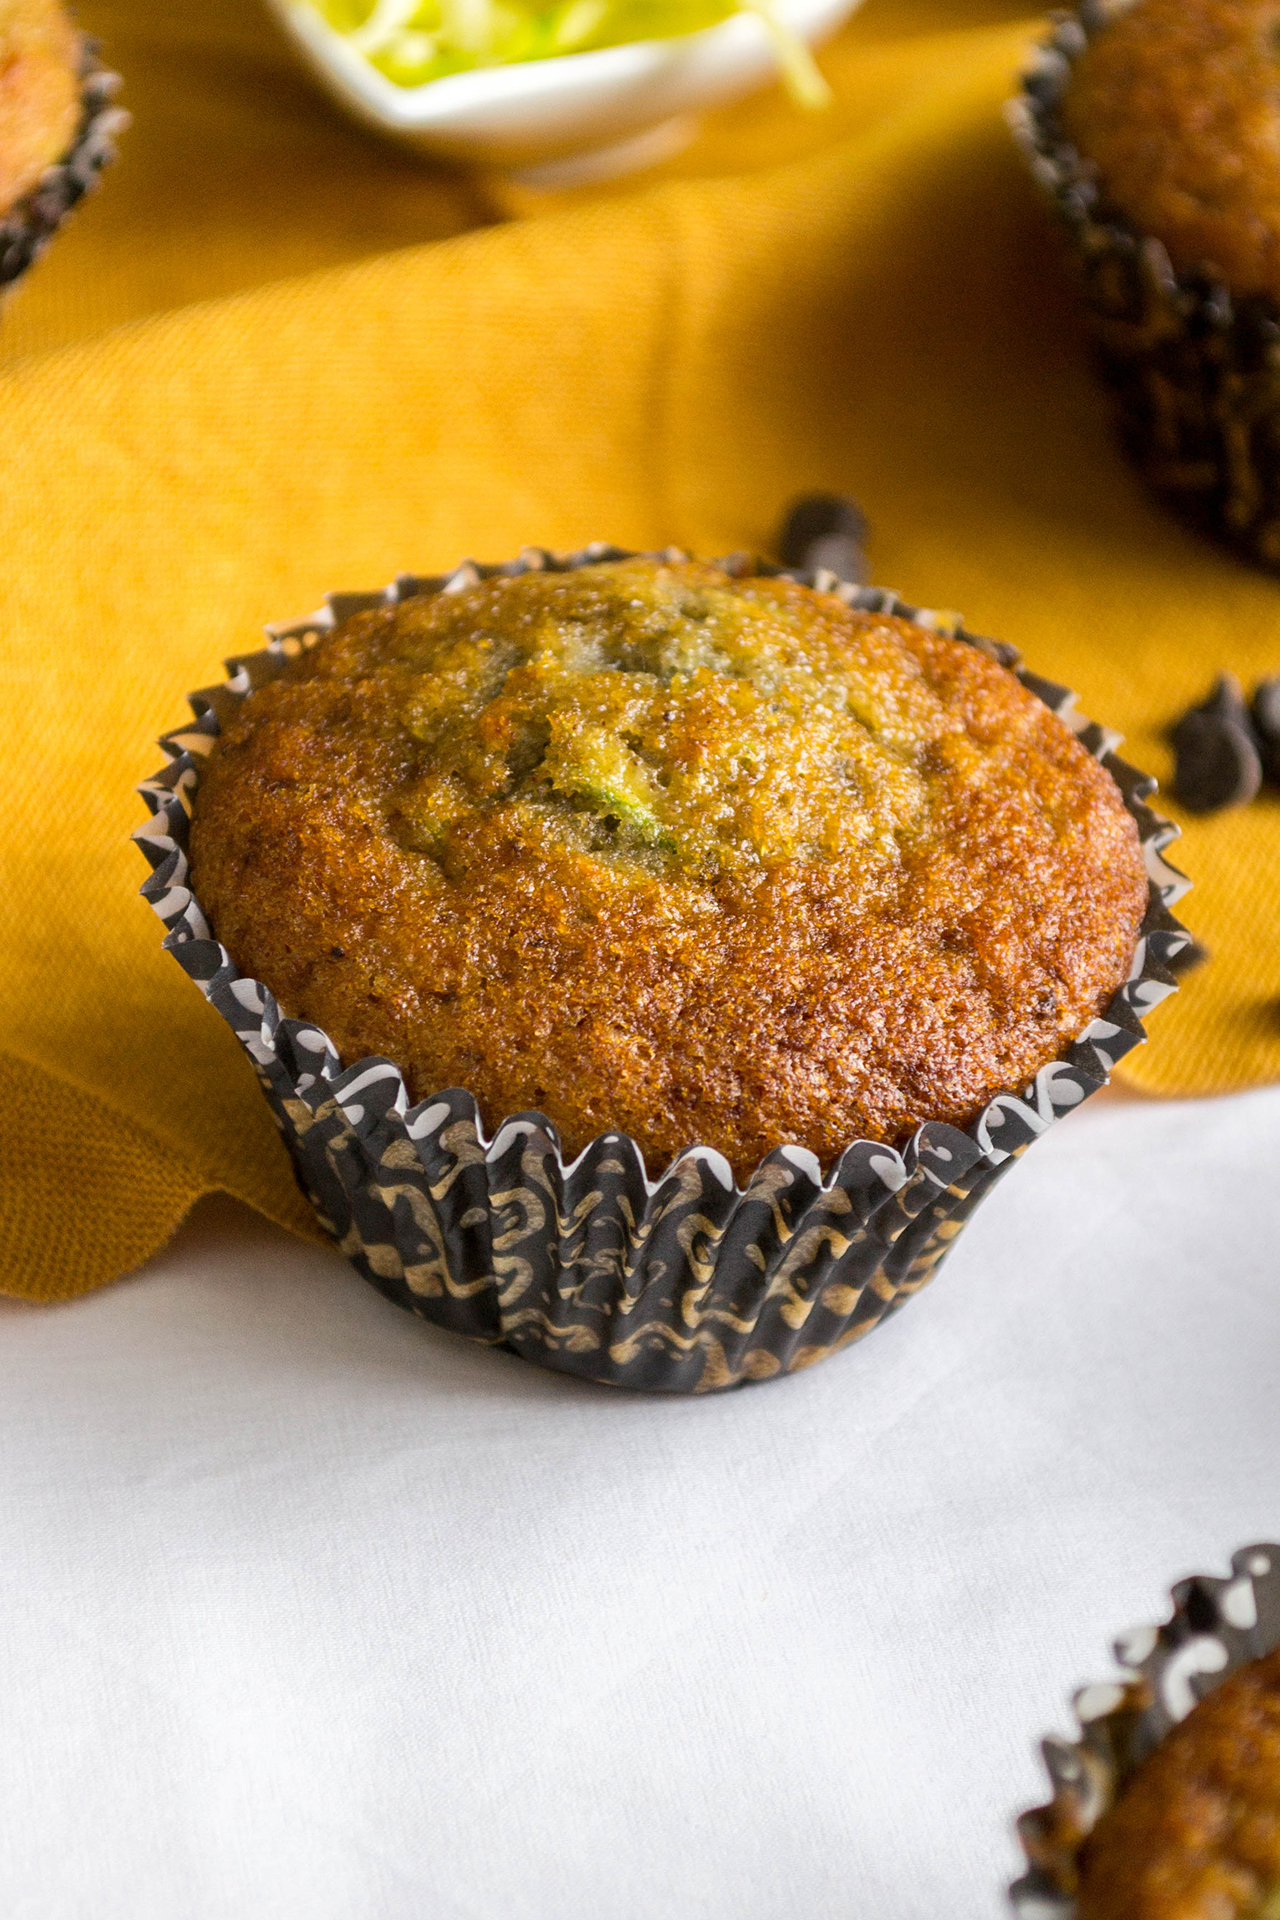  Cherry Zucchini Muffins. They’re great snacks at any time of the day!